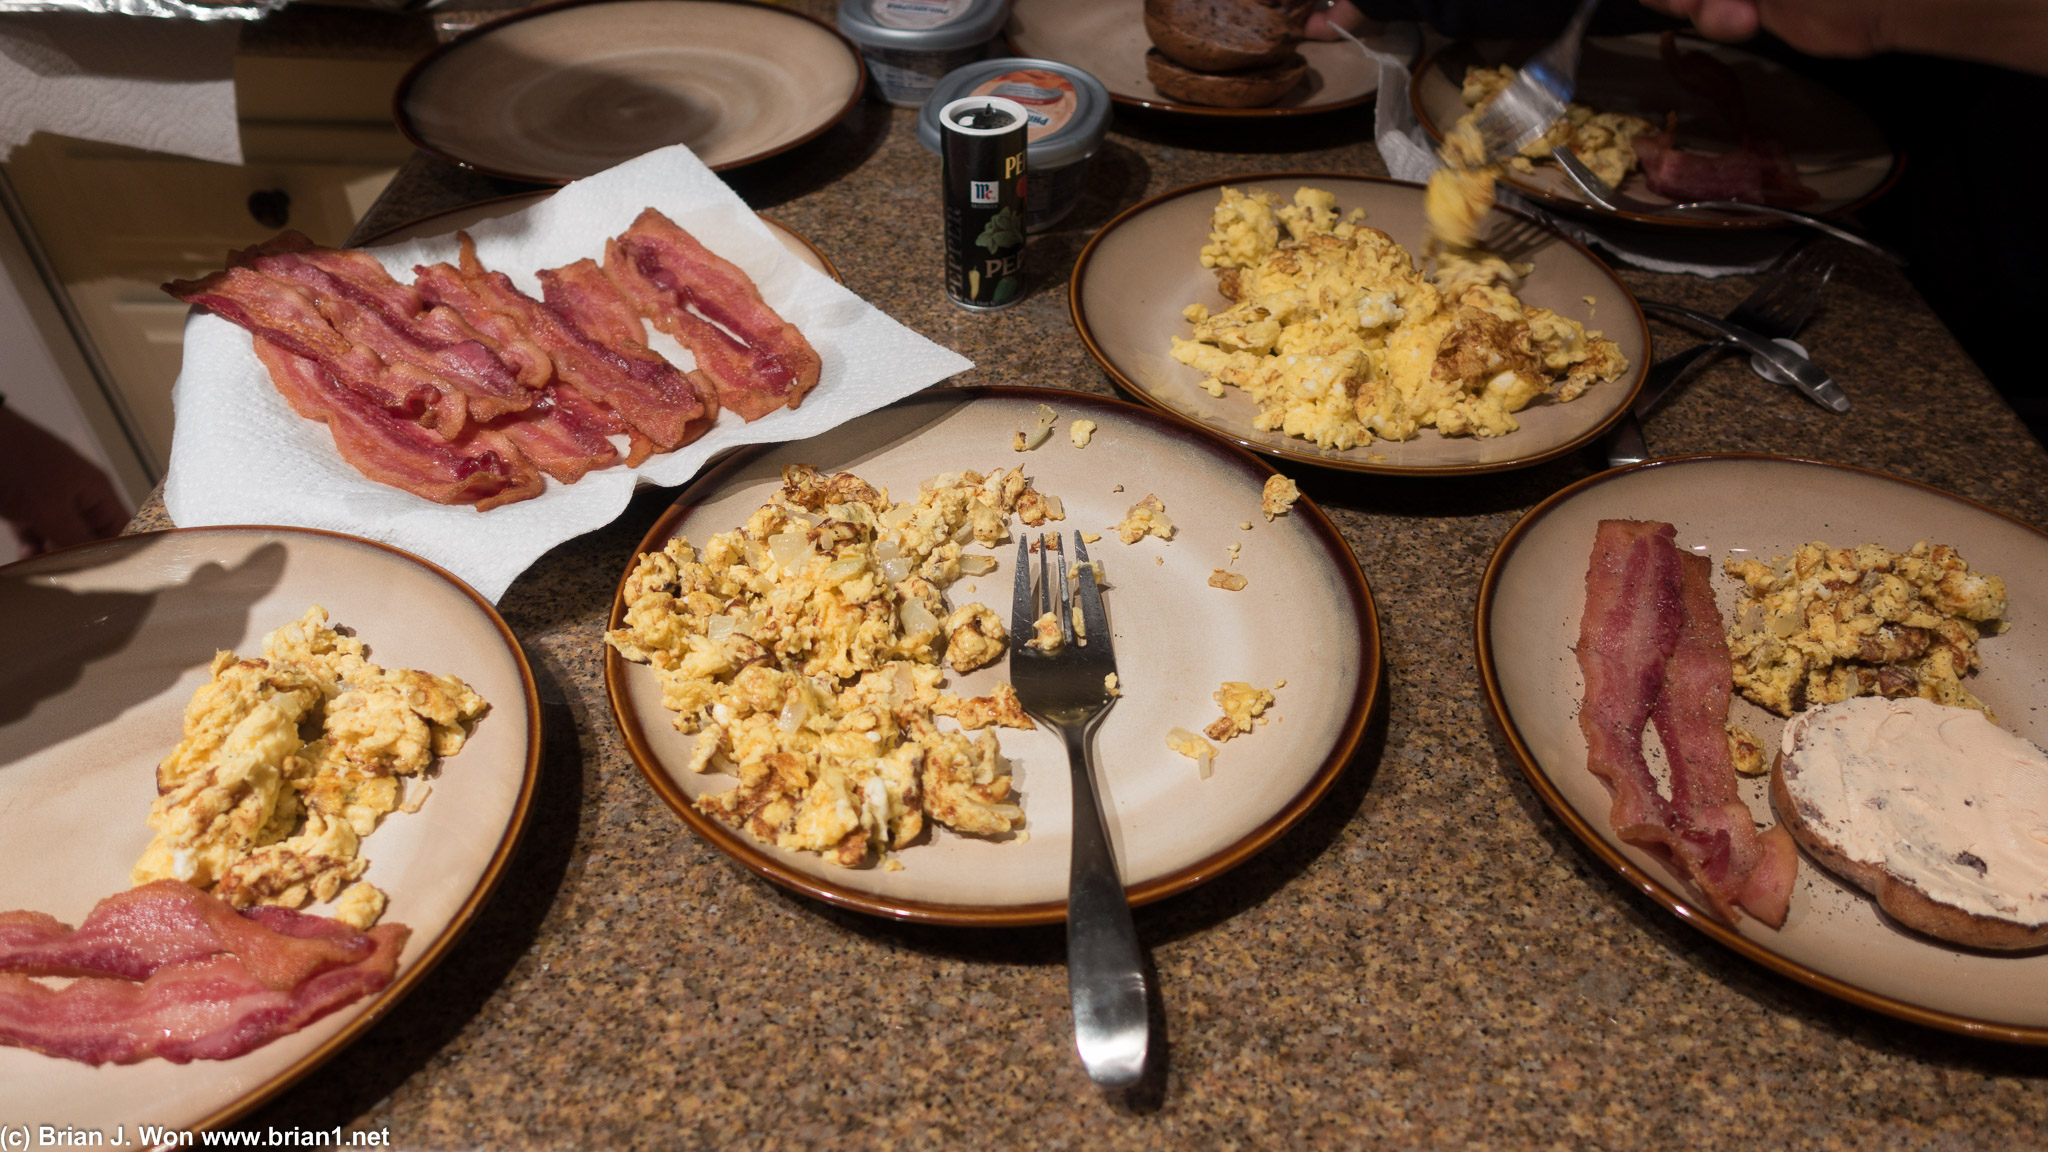 Mmm, bacon and eggs.